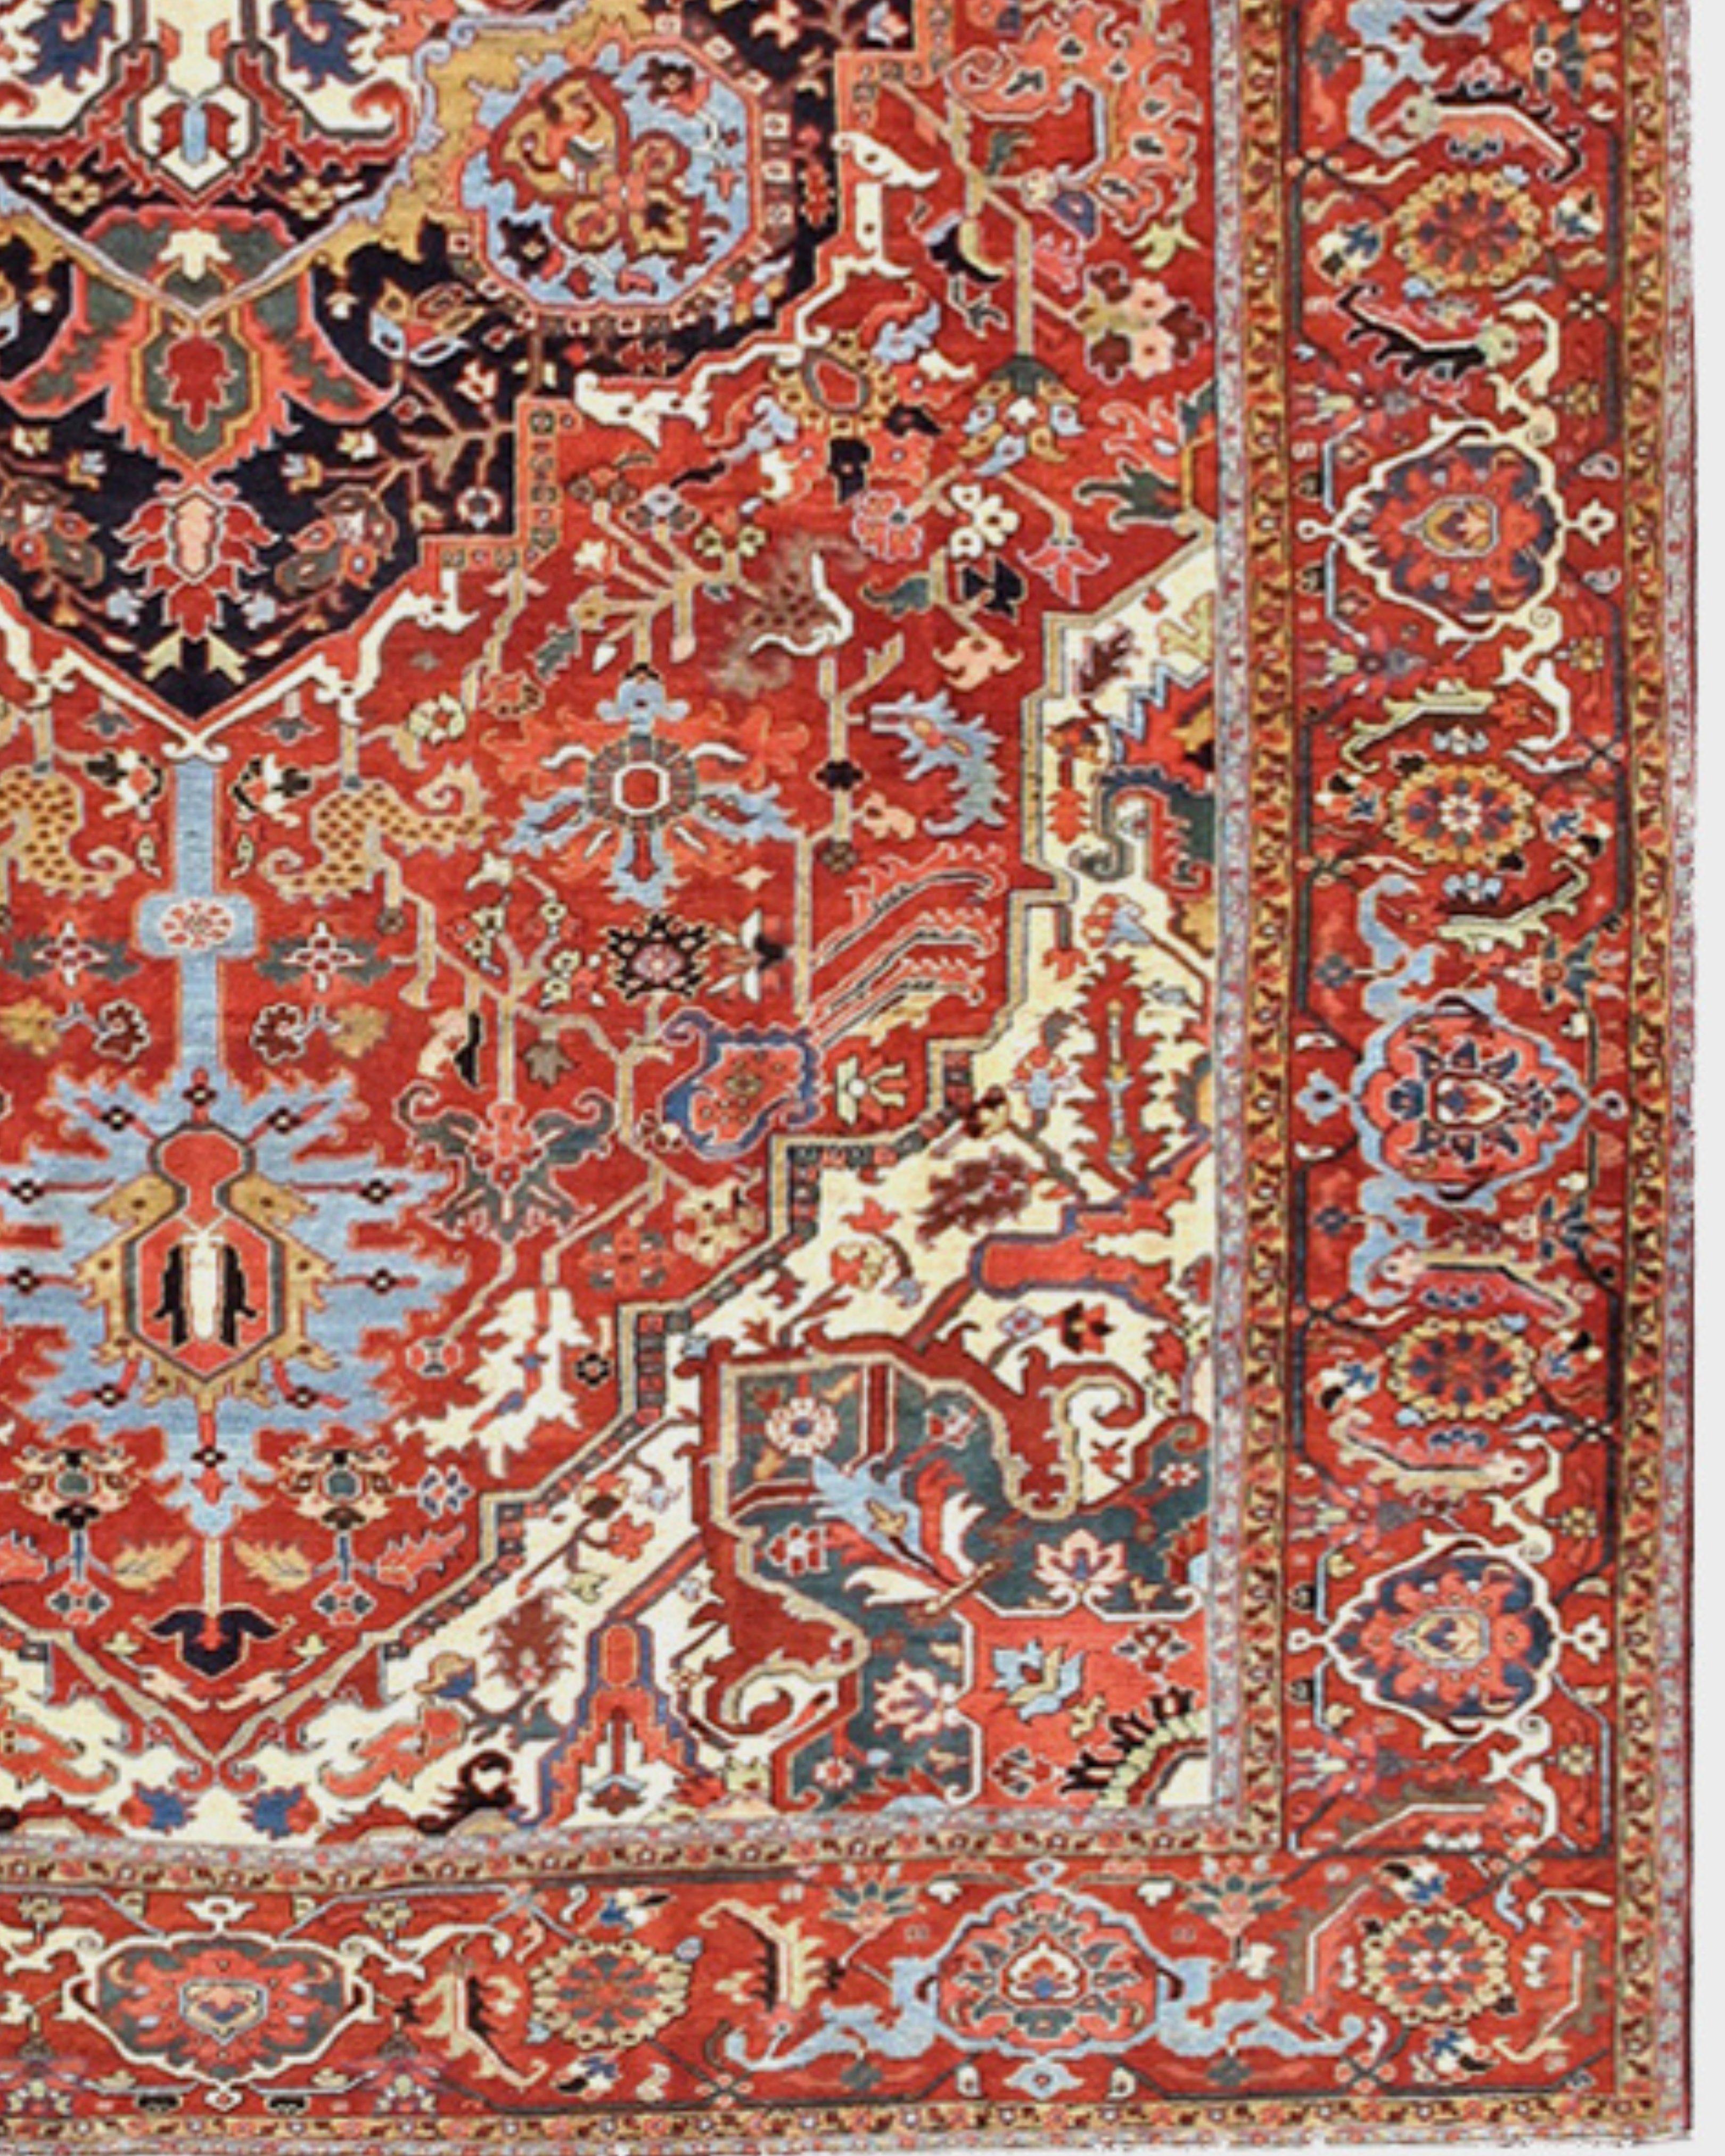 Wool Antique Large Persian Heriz Carpet, Early 20th Century For Sale